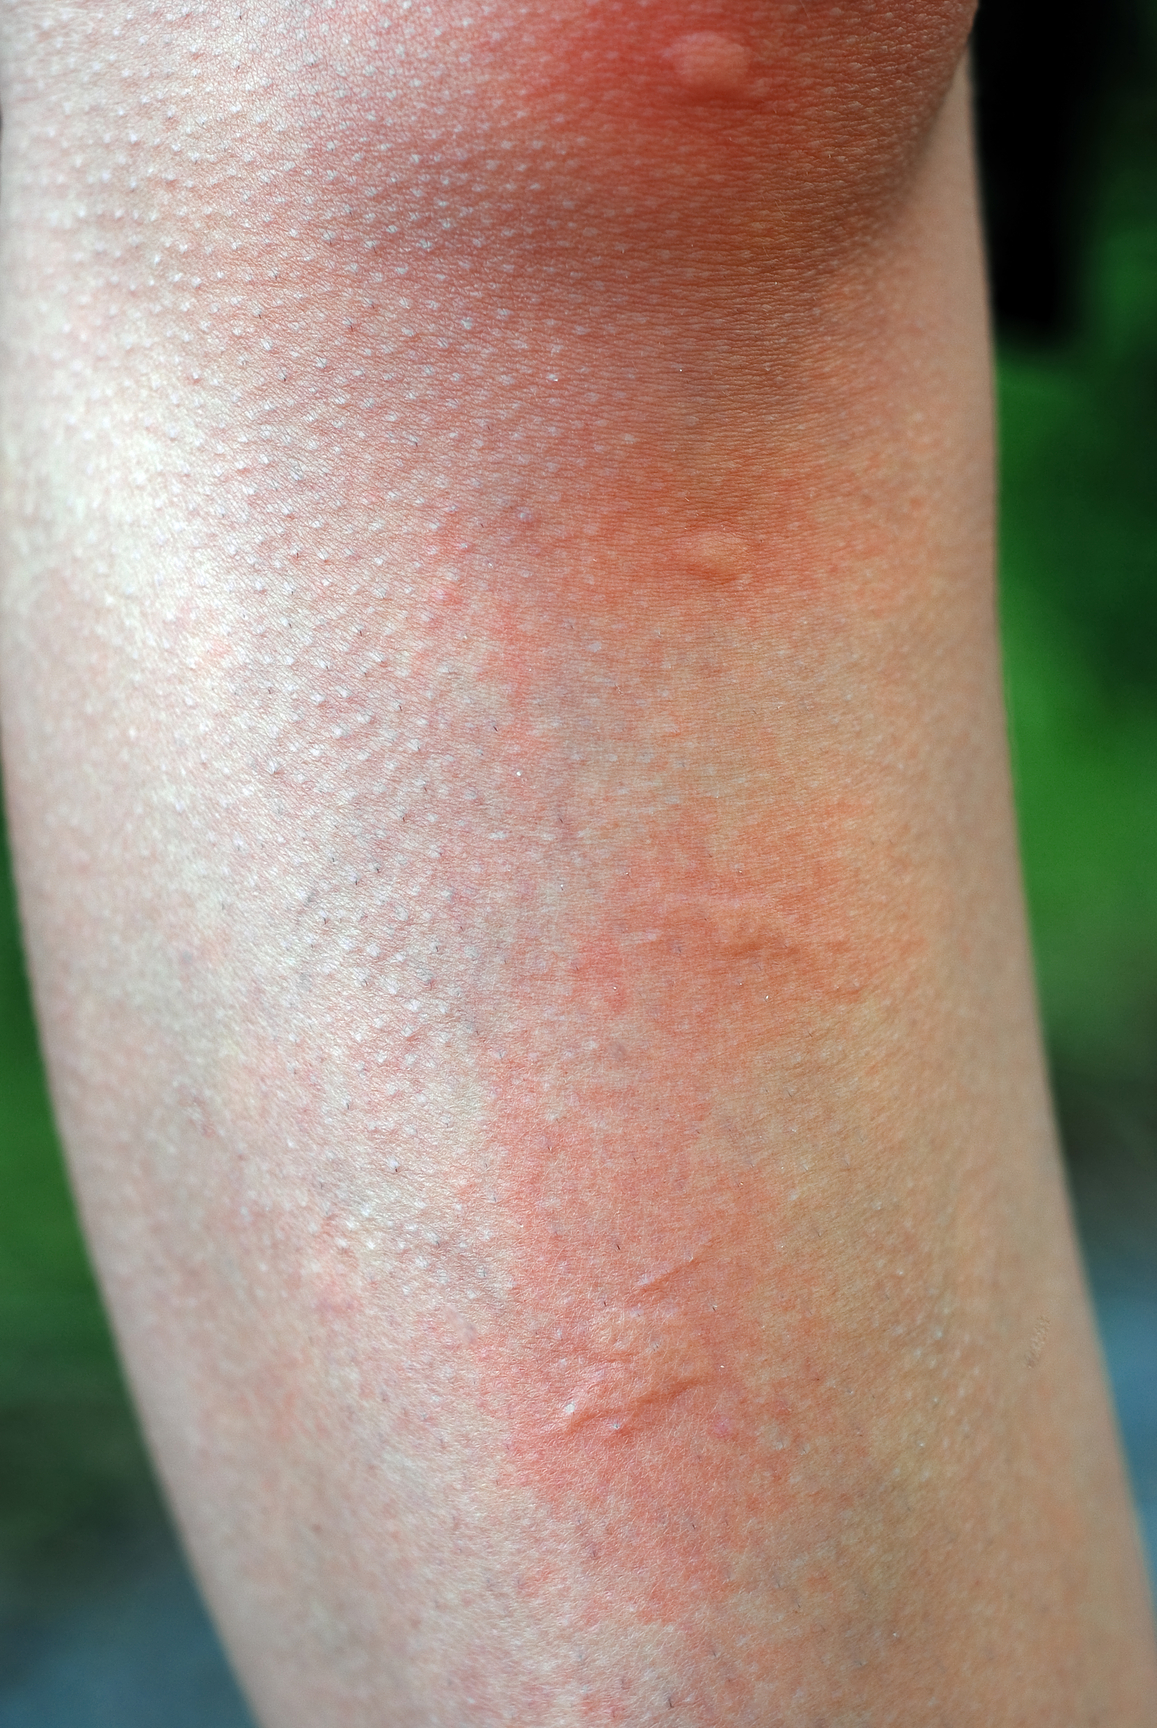 What causes hives in adults?